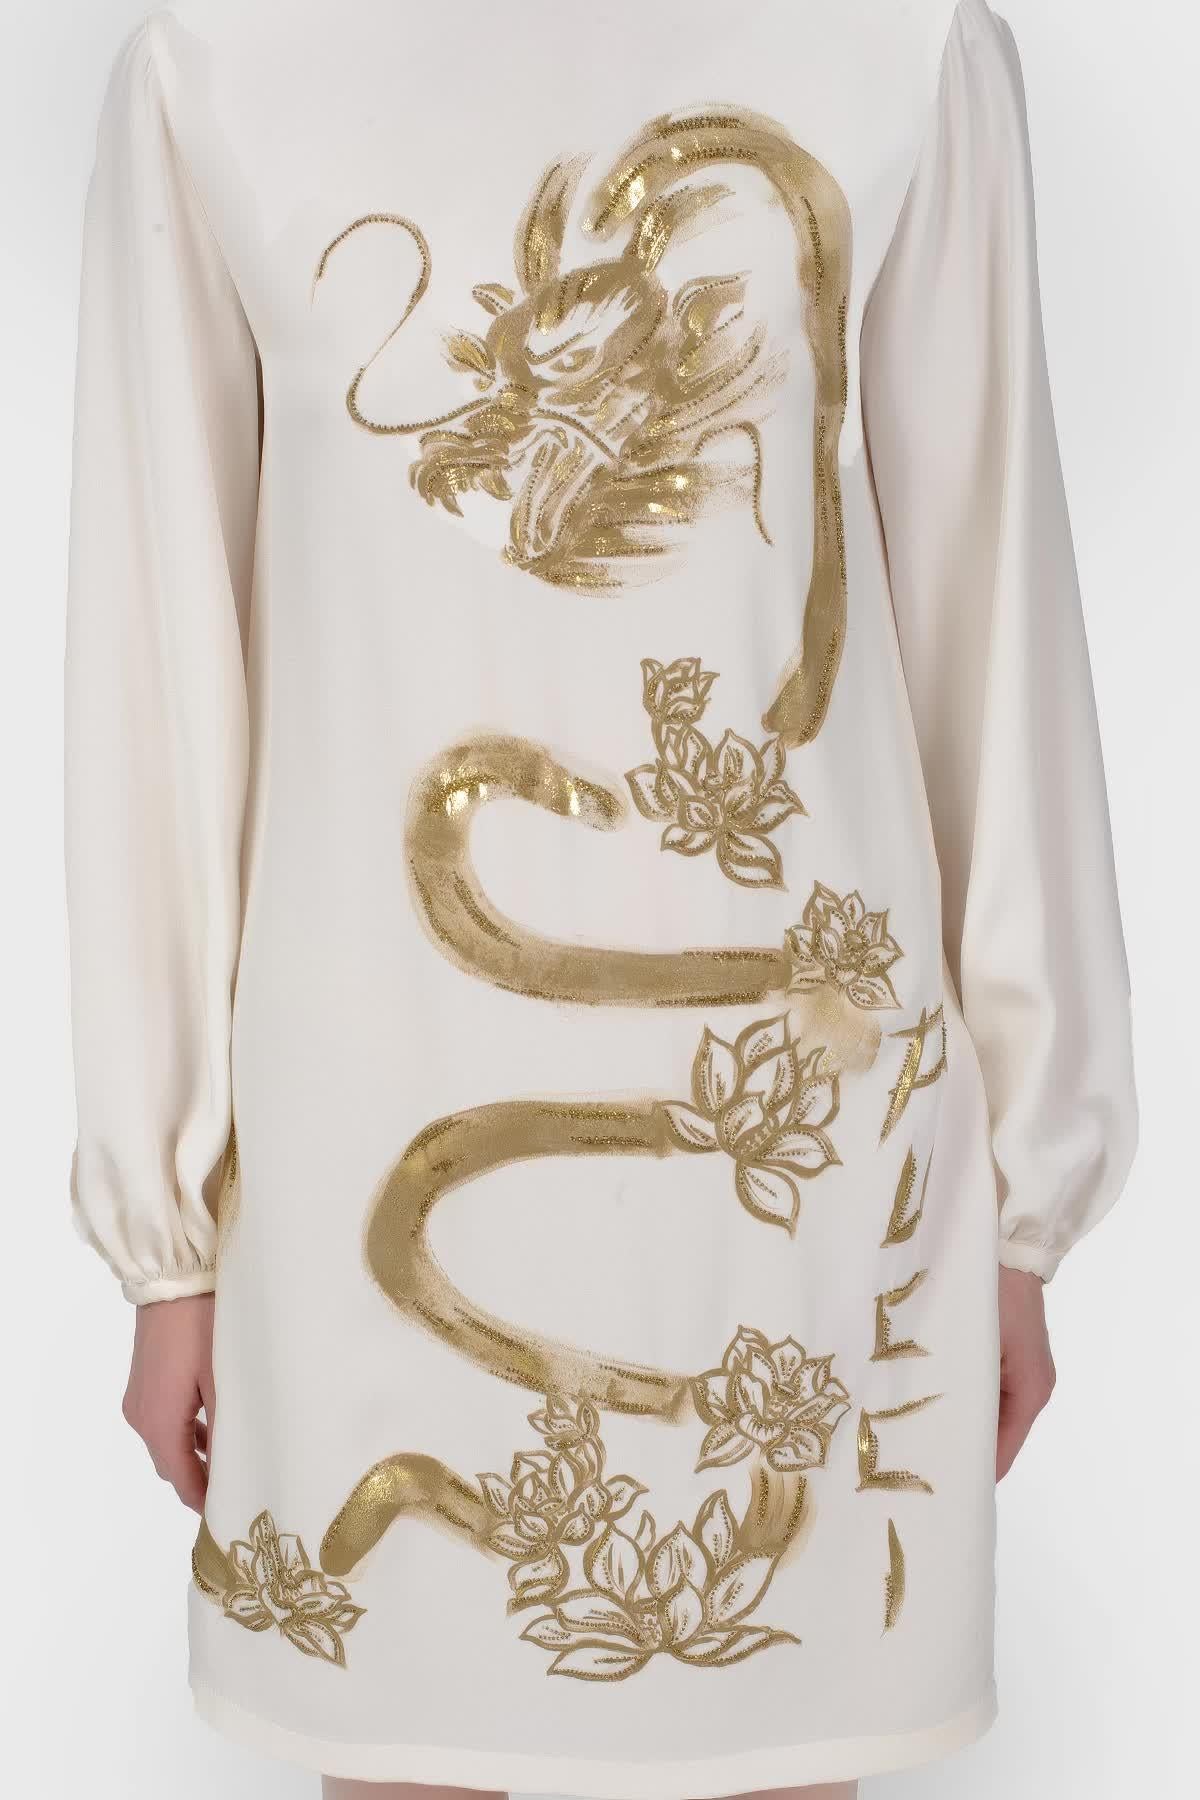 Emilio Pucci White Silk Dress with Gold Dragon 

Color: White

Sleeve length 61 cm

Composition: 100% silk

A-line

Stand collar

Branded button fastening at the back

Notched cutout on the back

Size: IT - 40, US - 4

Made in Italy

Excellent